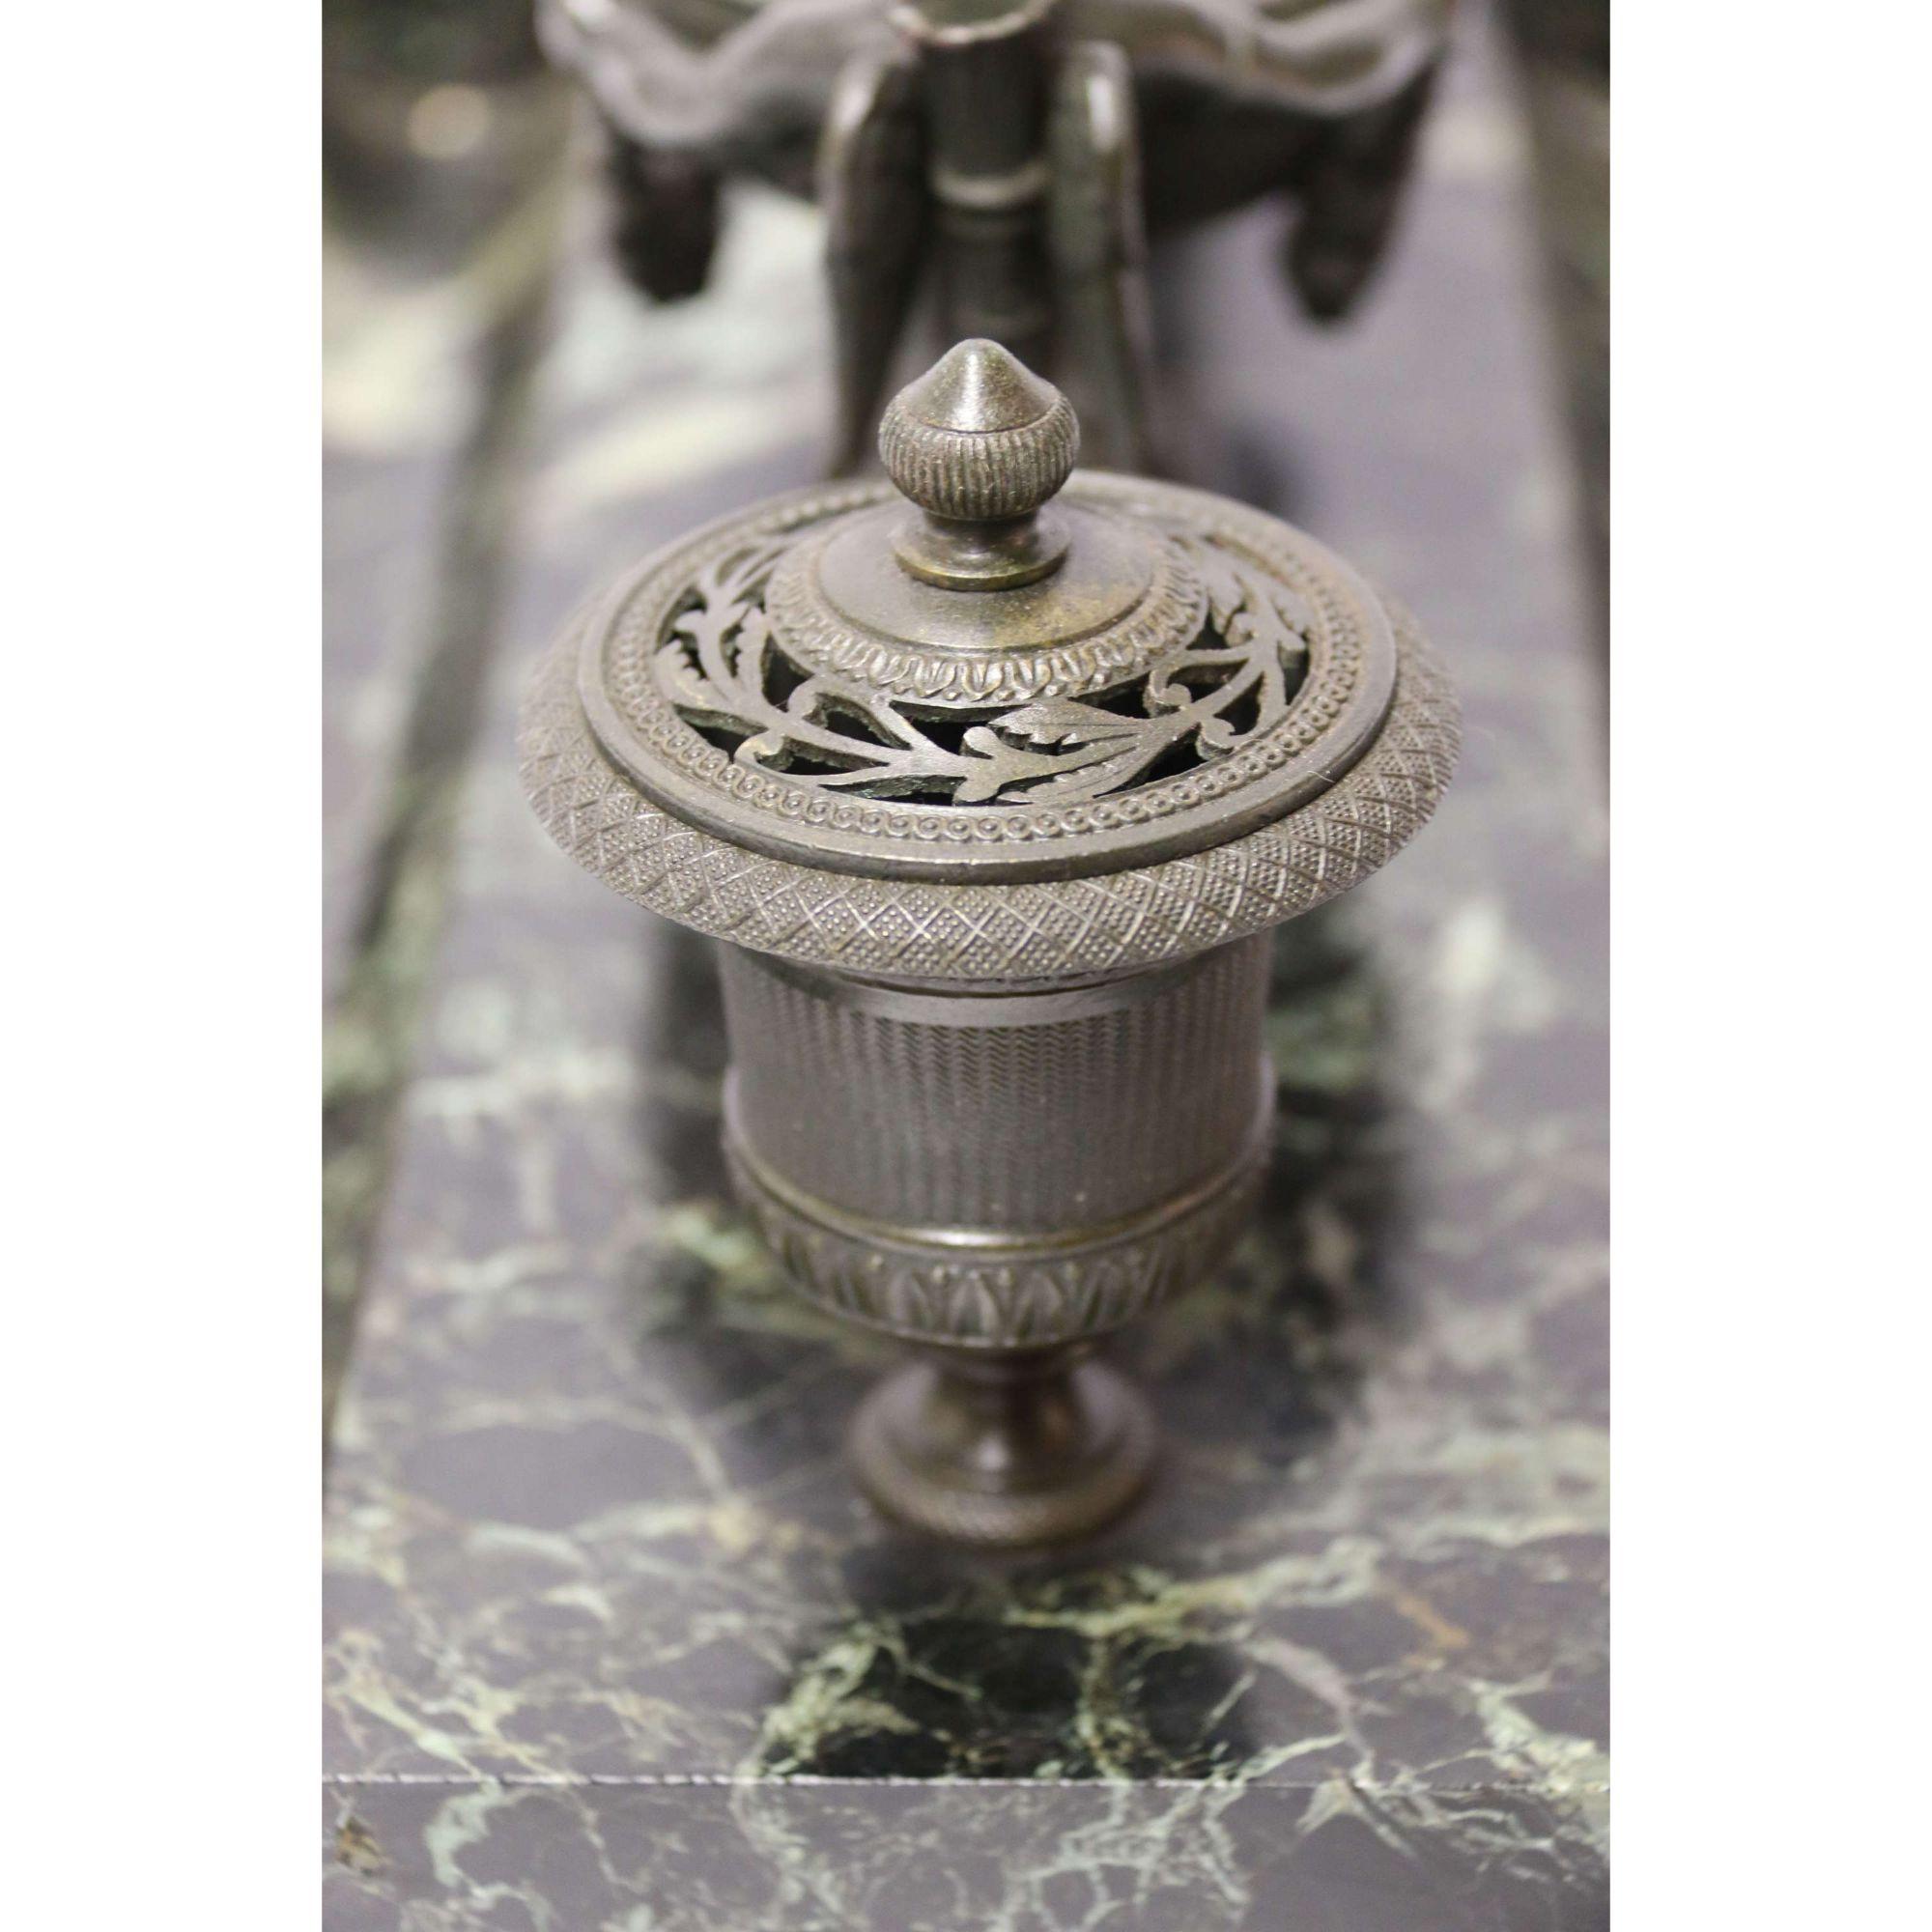 Empire Bronze and Marble Desk Top Inkstand by Lefebvre of Belgium, circa 1820 For Sale 4